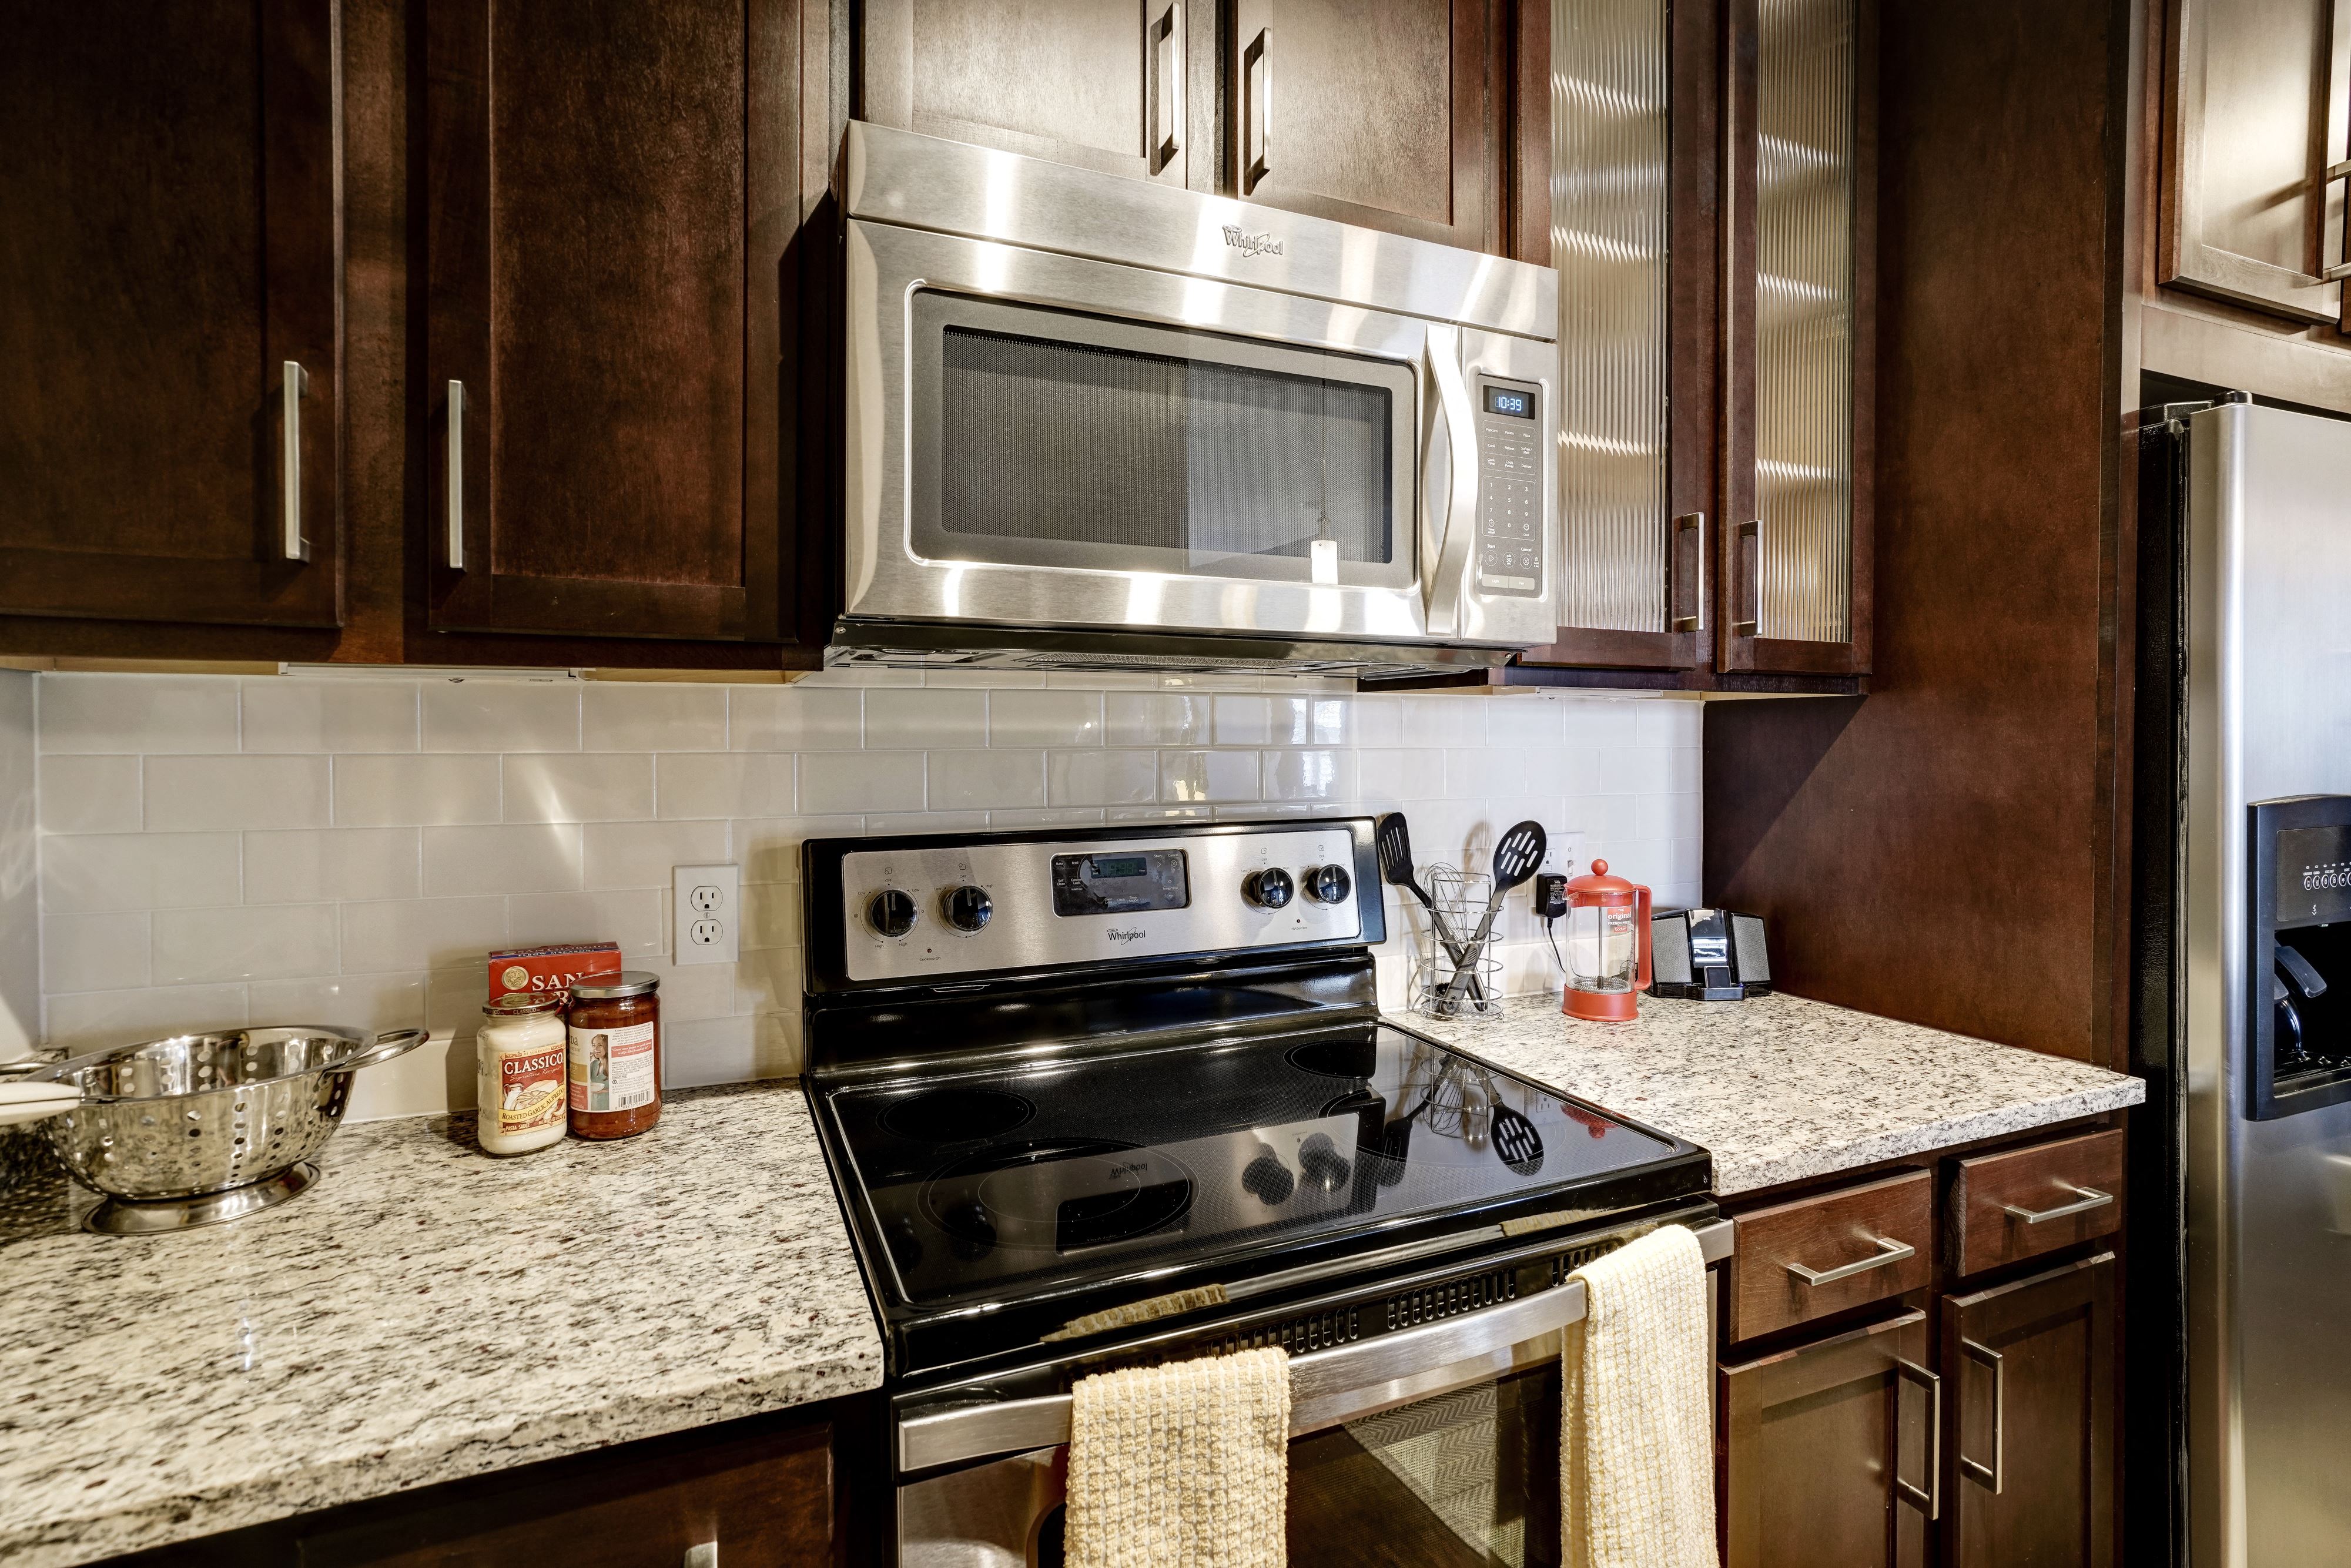 Stainless Steel, Energy Star Appliances